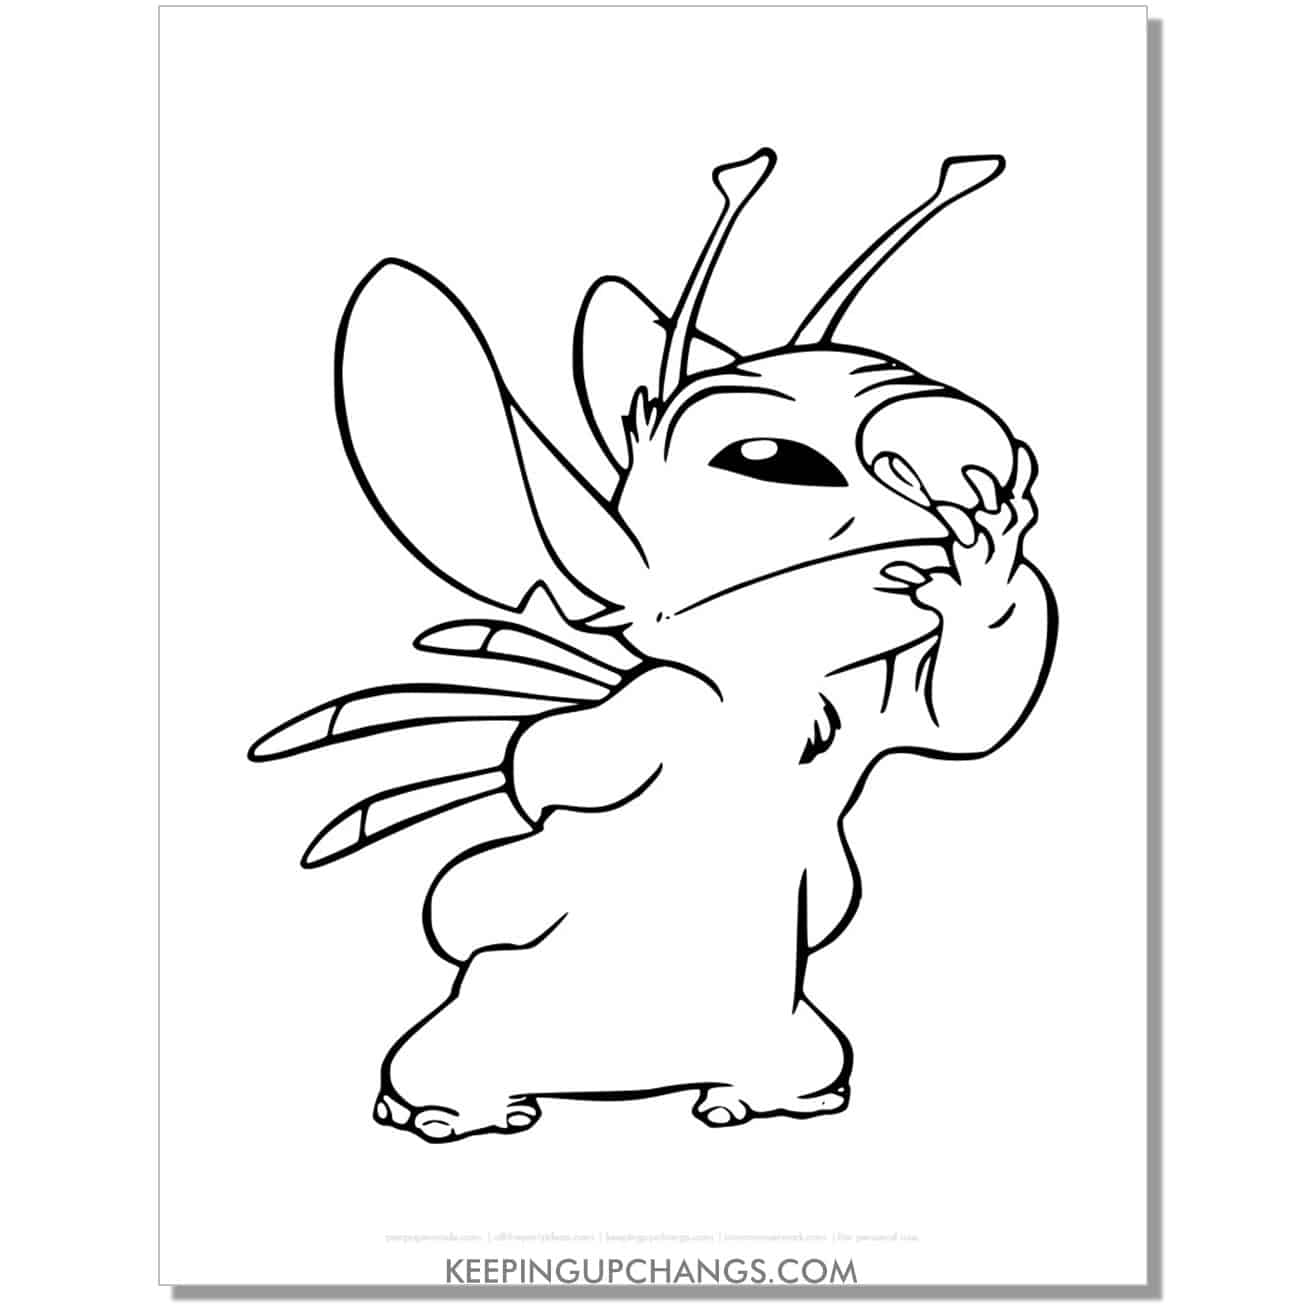 free stitch with hand on mouth in thinking position coloring page.